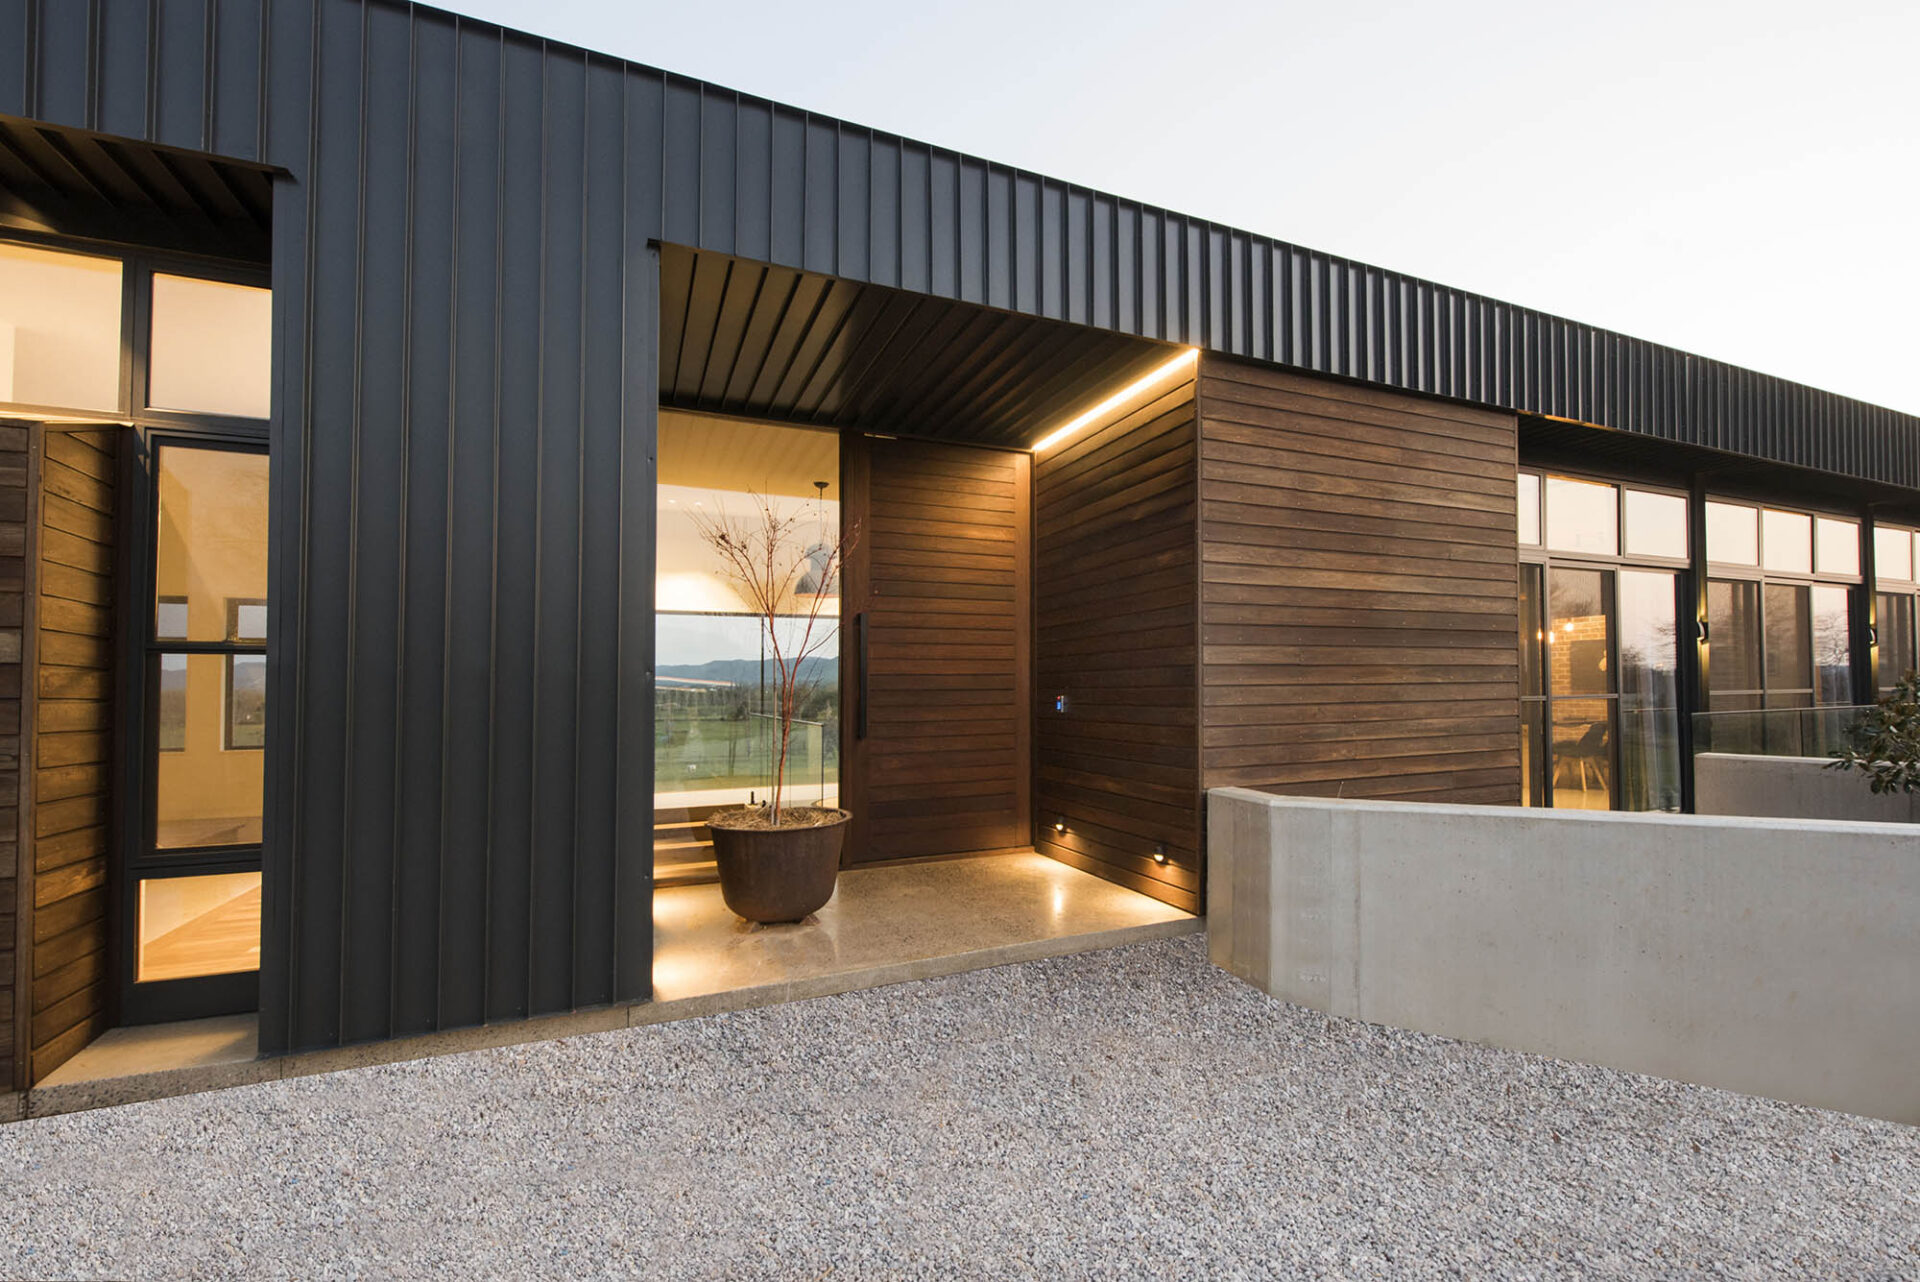 Exterior wall cladding & timber weatherboards